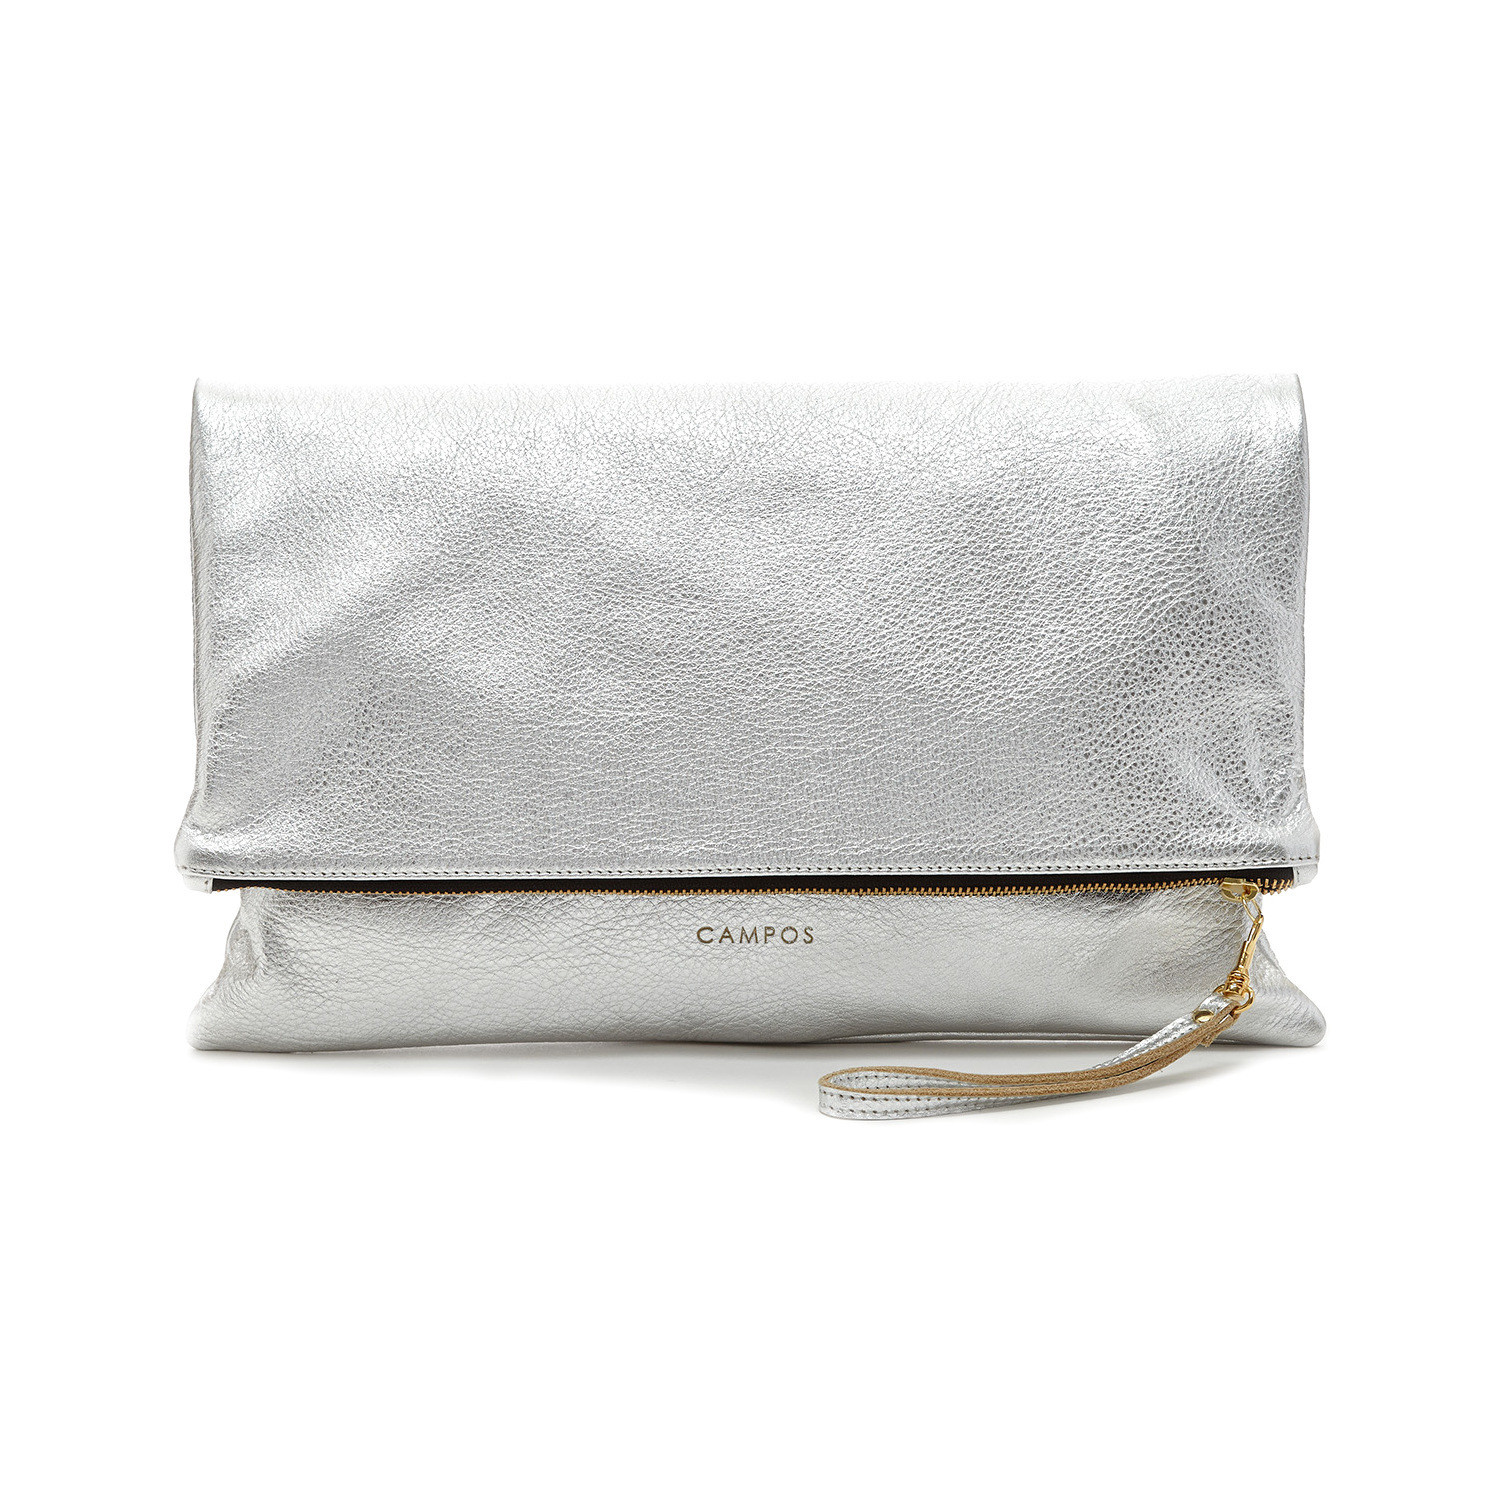 Campos Bags: XL Fold It Over Clutch (More Colors!)